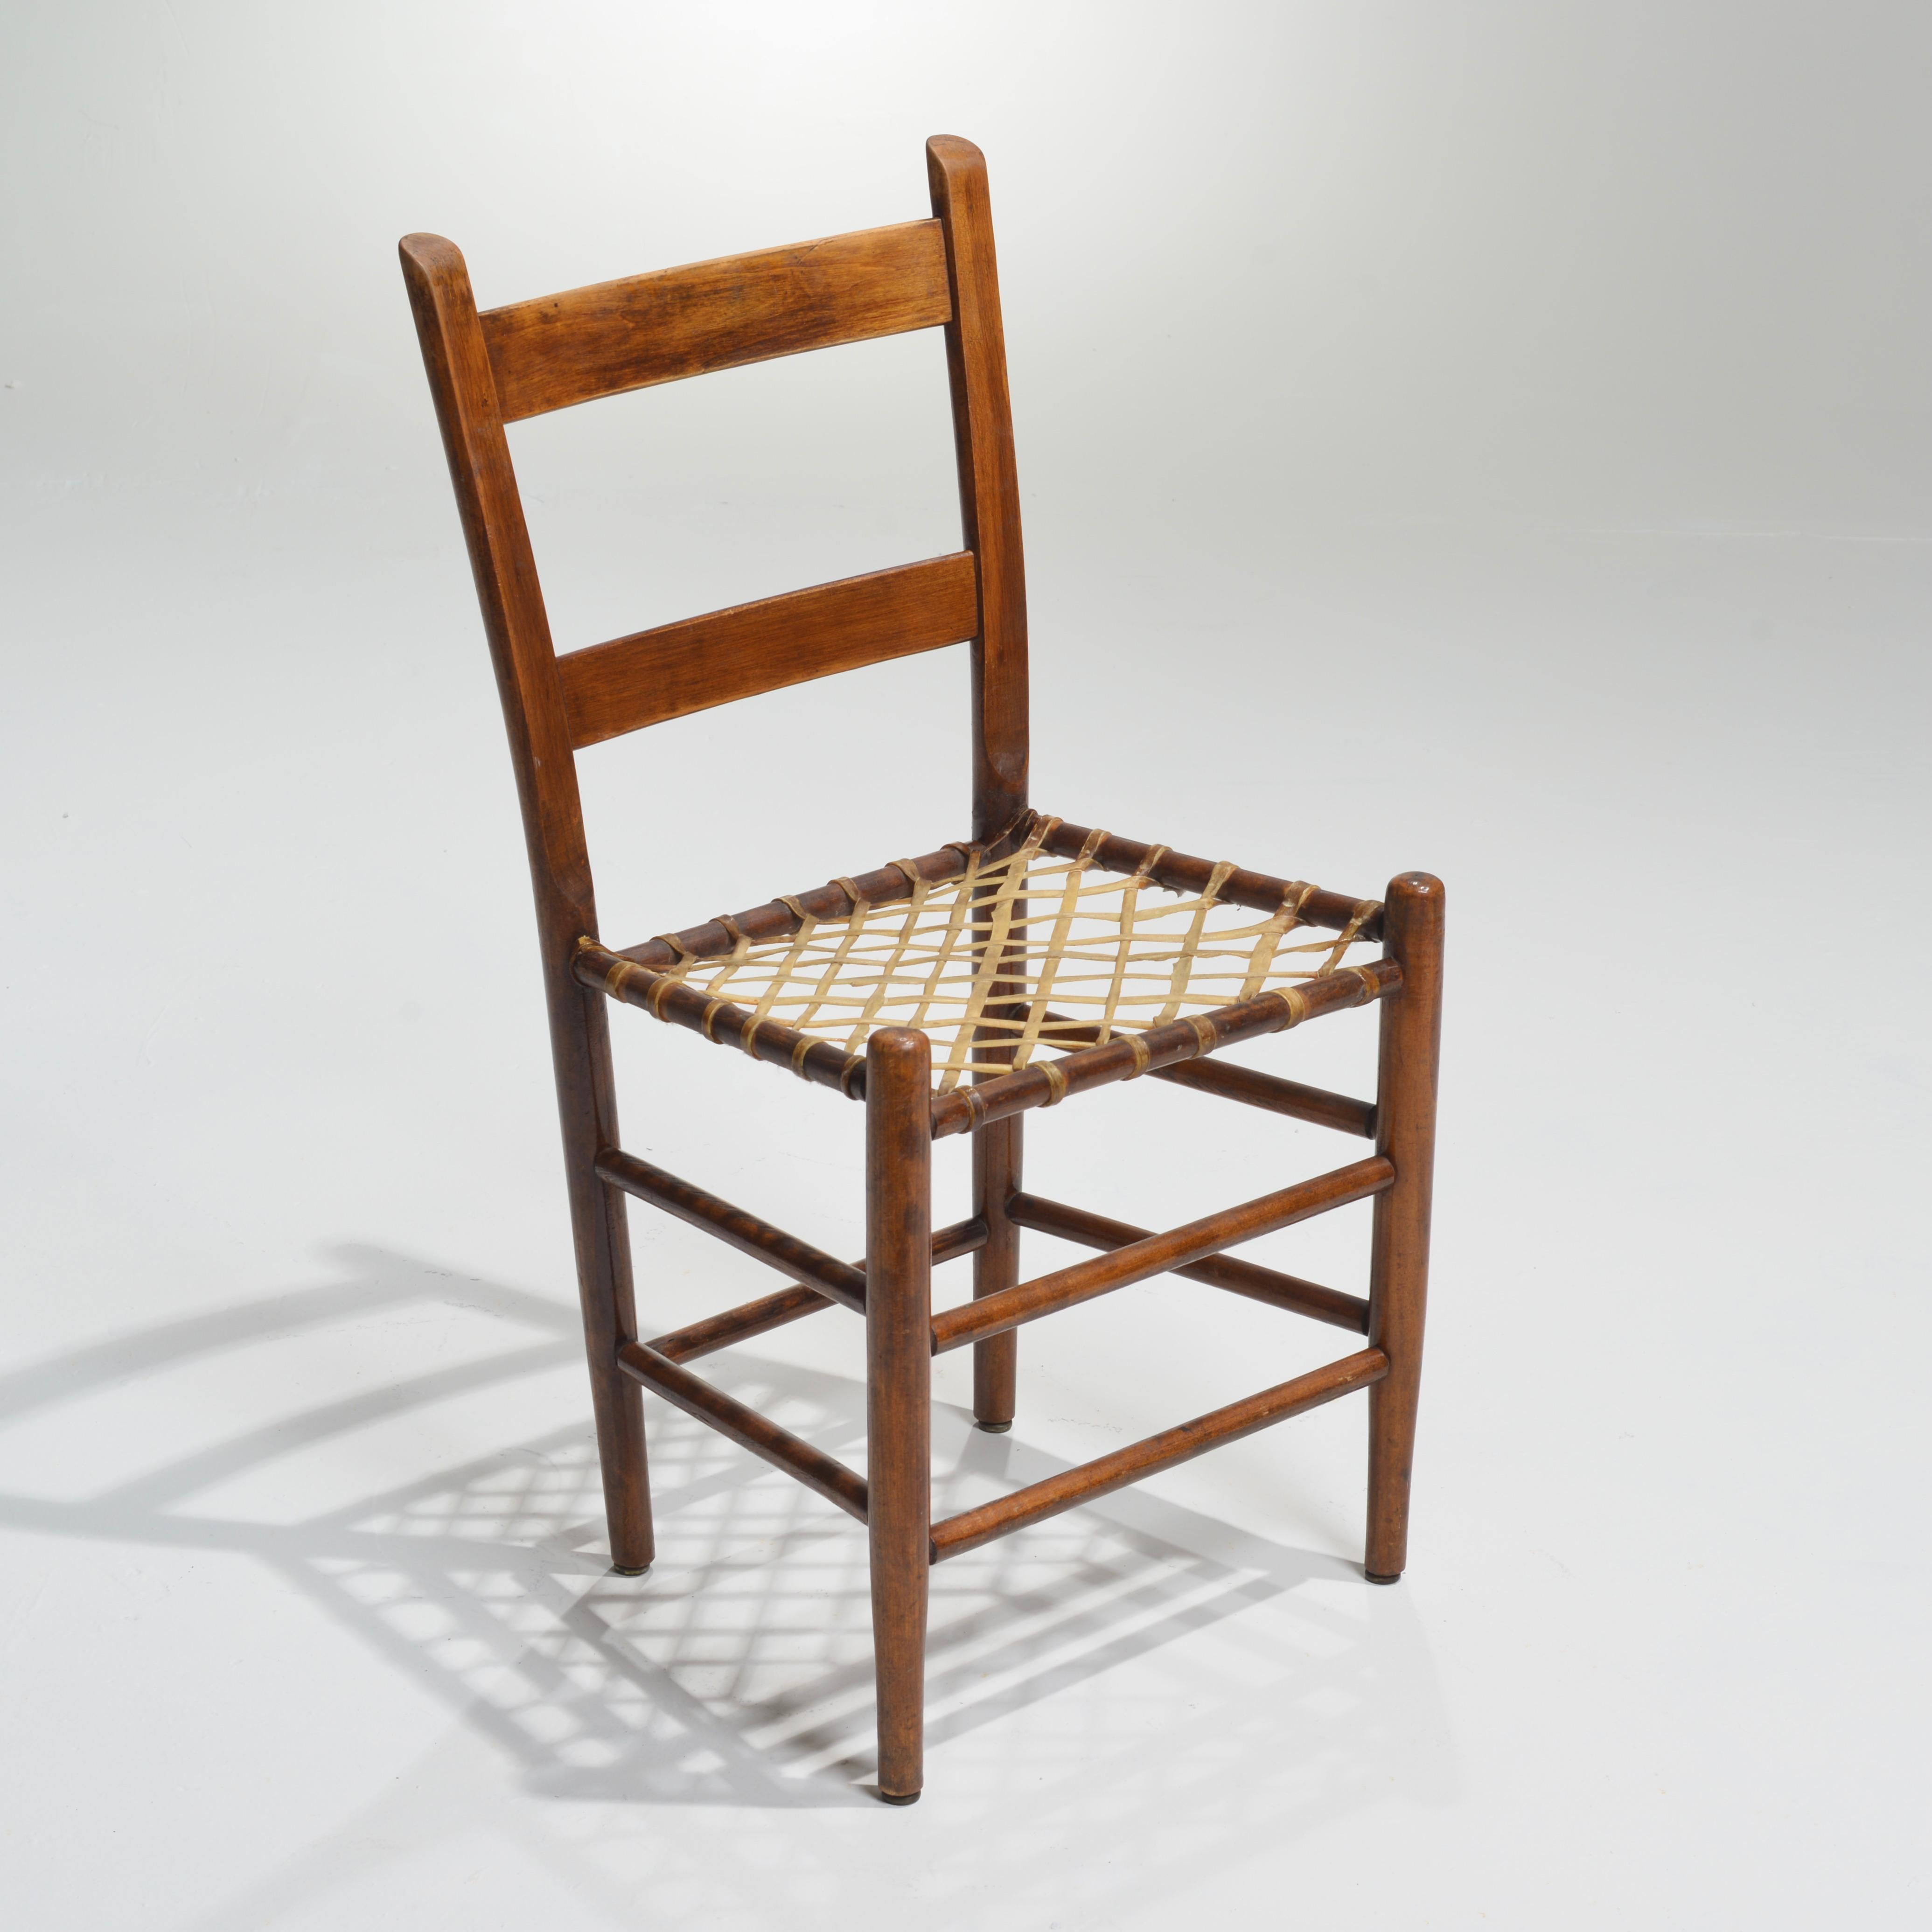 19th Century Rawhide Primitive Chairs, c. 1850 For Sale 2